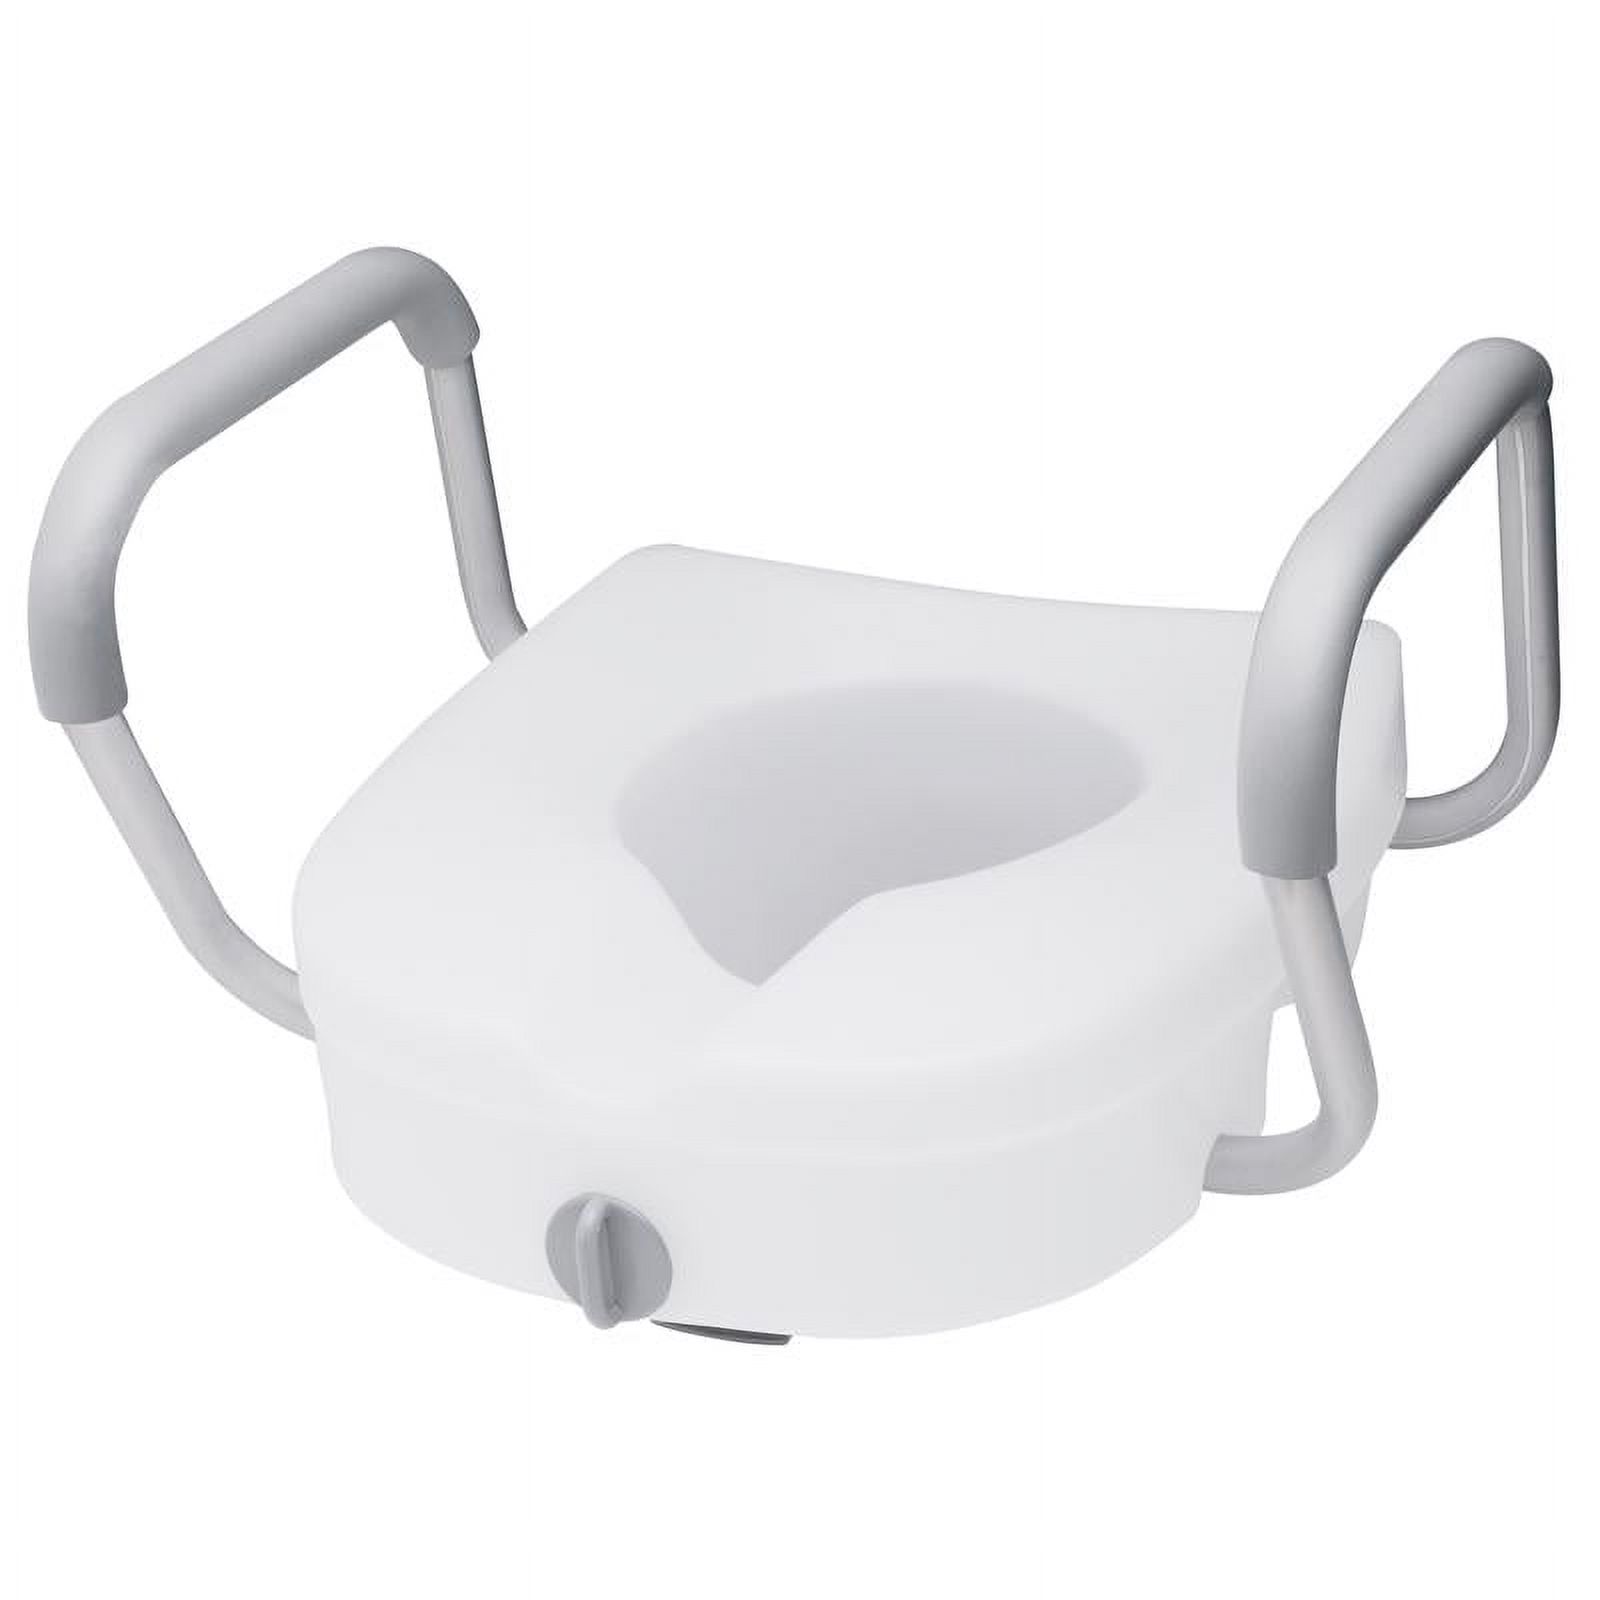 Carex EZ Lock Raised Toilet Seat with Handles, Adjustable Removable Arms, Adds 5", 300 lb Capacity - image 2 of 5